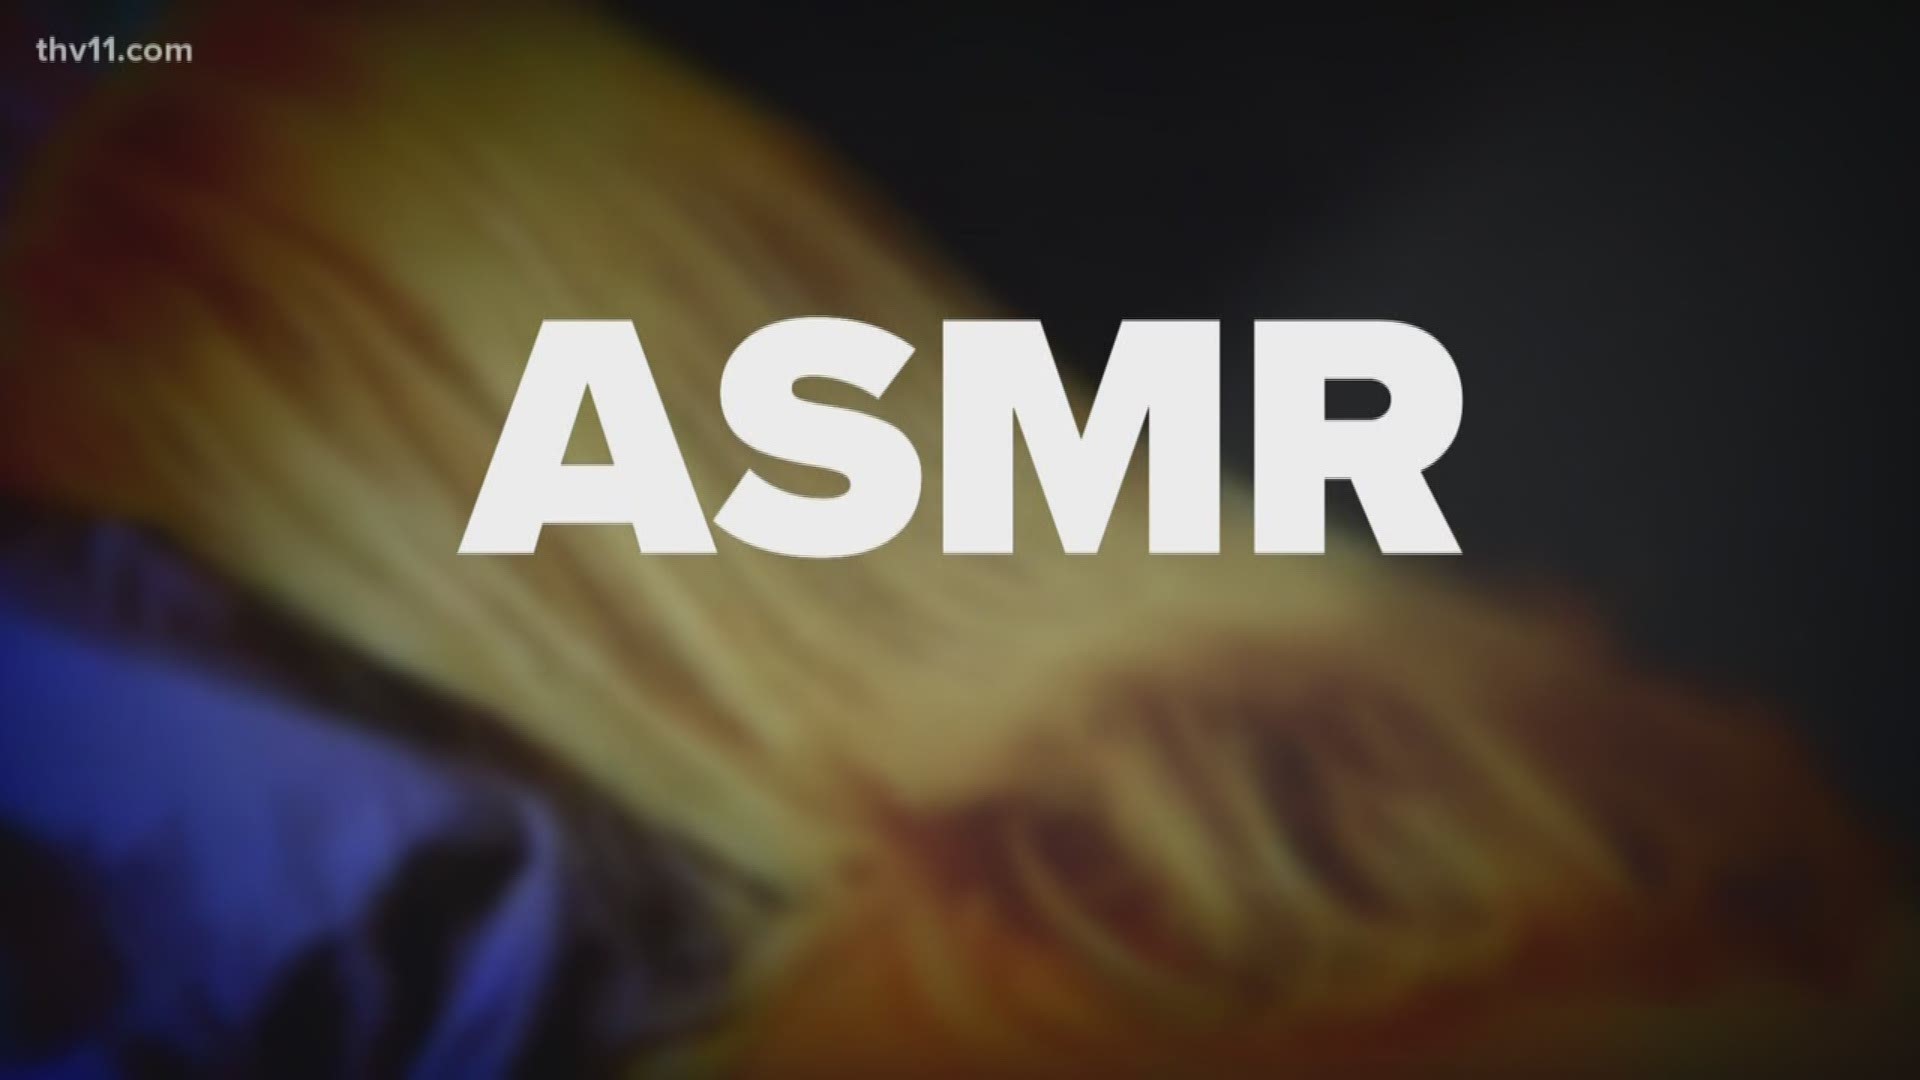 People are watching YouTubers whisper, fold towels and even read in a soothing voice to feel relaxed and get to sleep. It's called ASMR, and millions are tuning in.